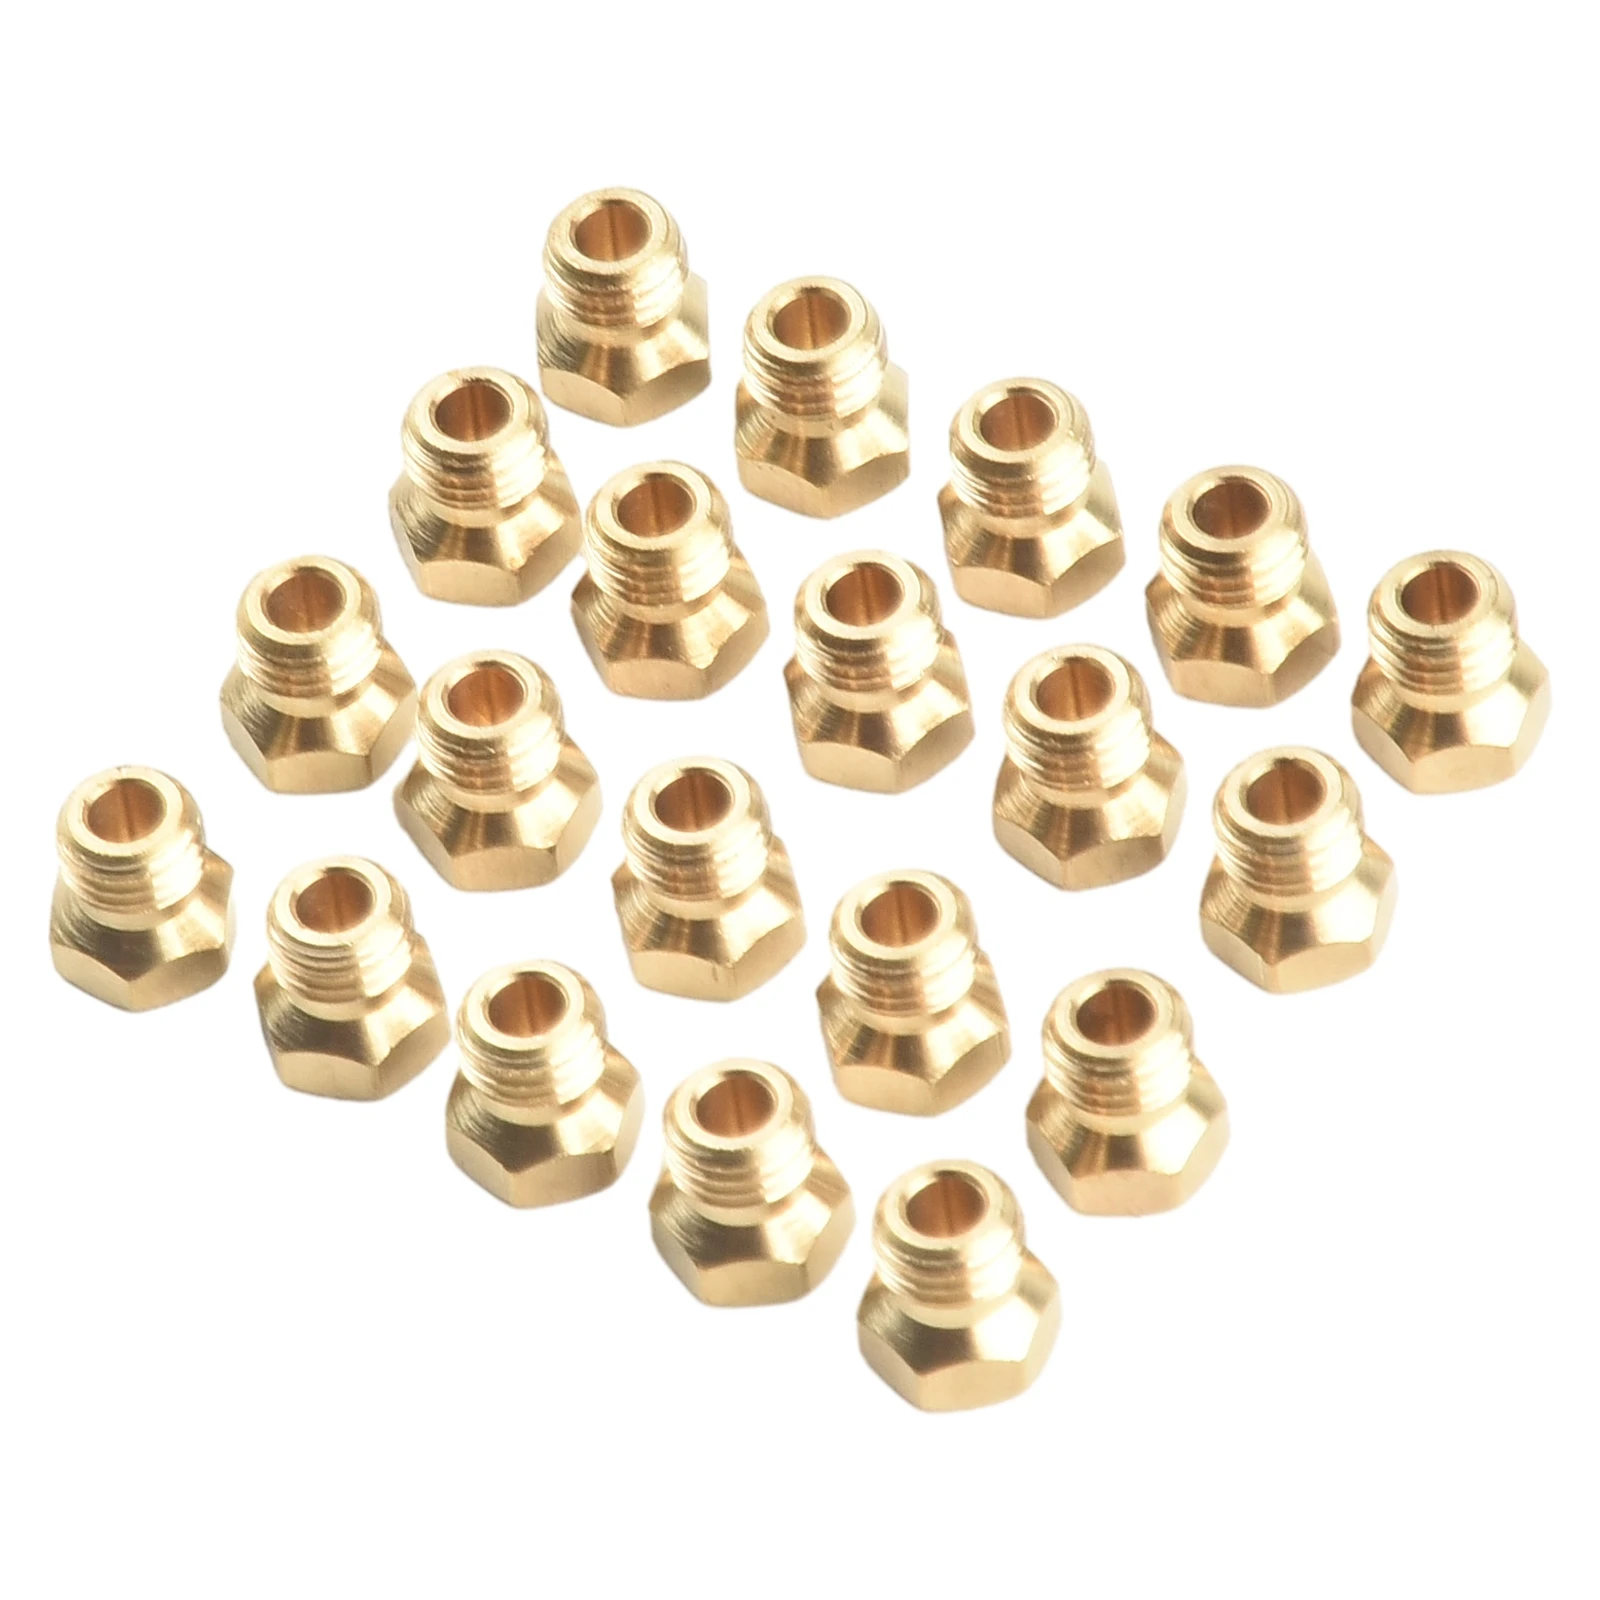 

Barbecue Parts Brass Fire Hose Nozzles Grill Replacement Replacement Parts Various Outdoor Cooking Durable Propane Gas Nozzles